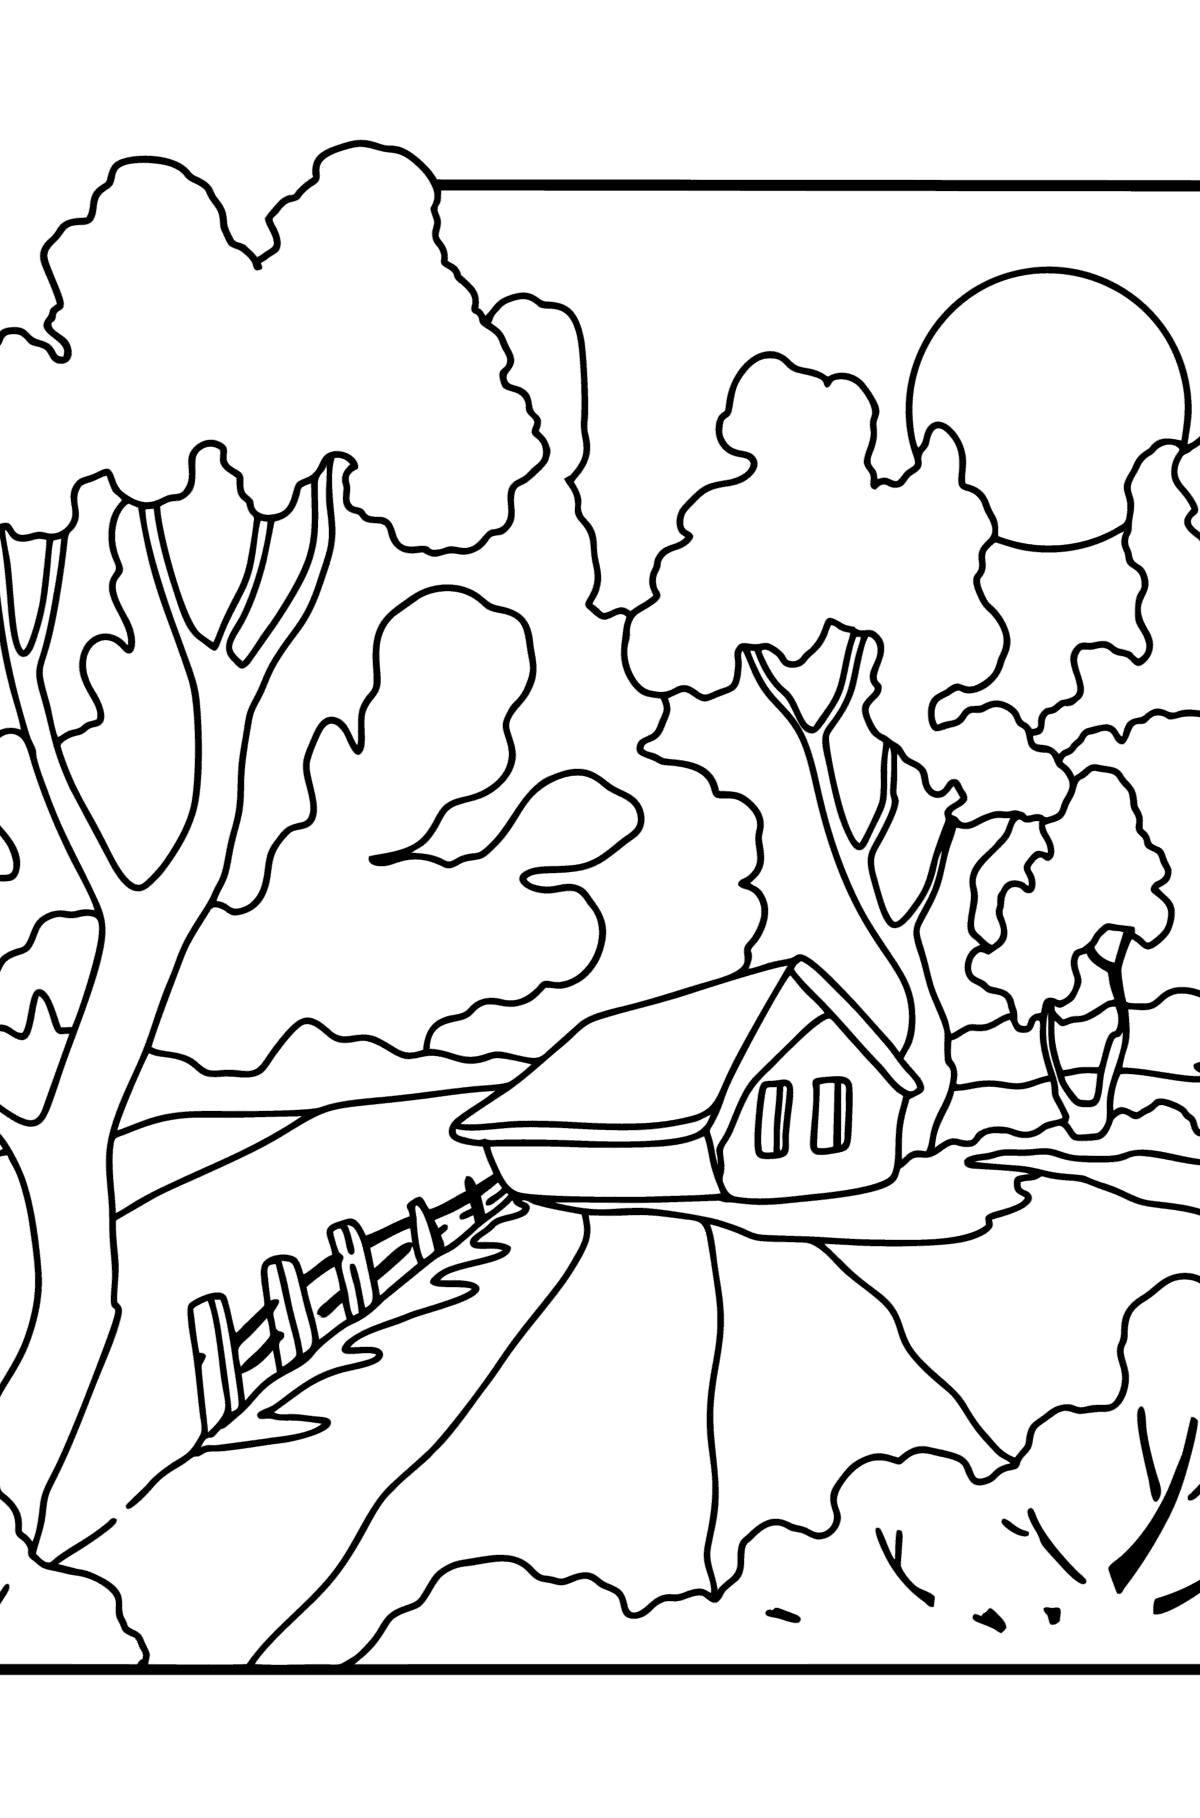 farm-coloring-pages-for-adults